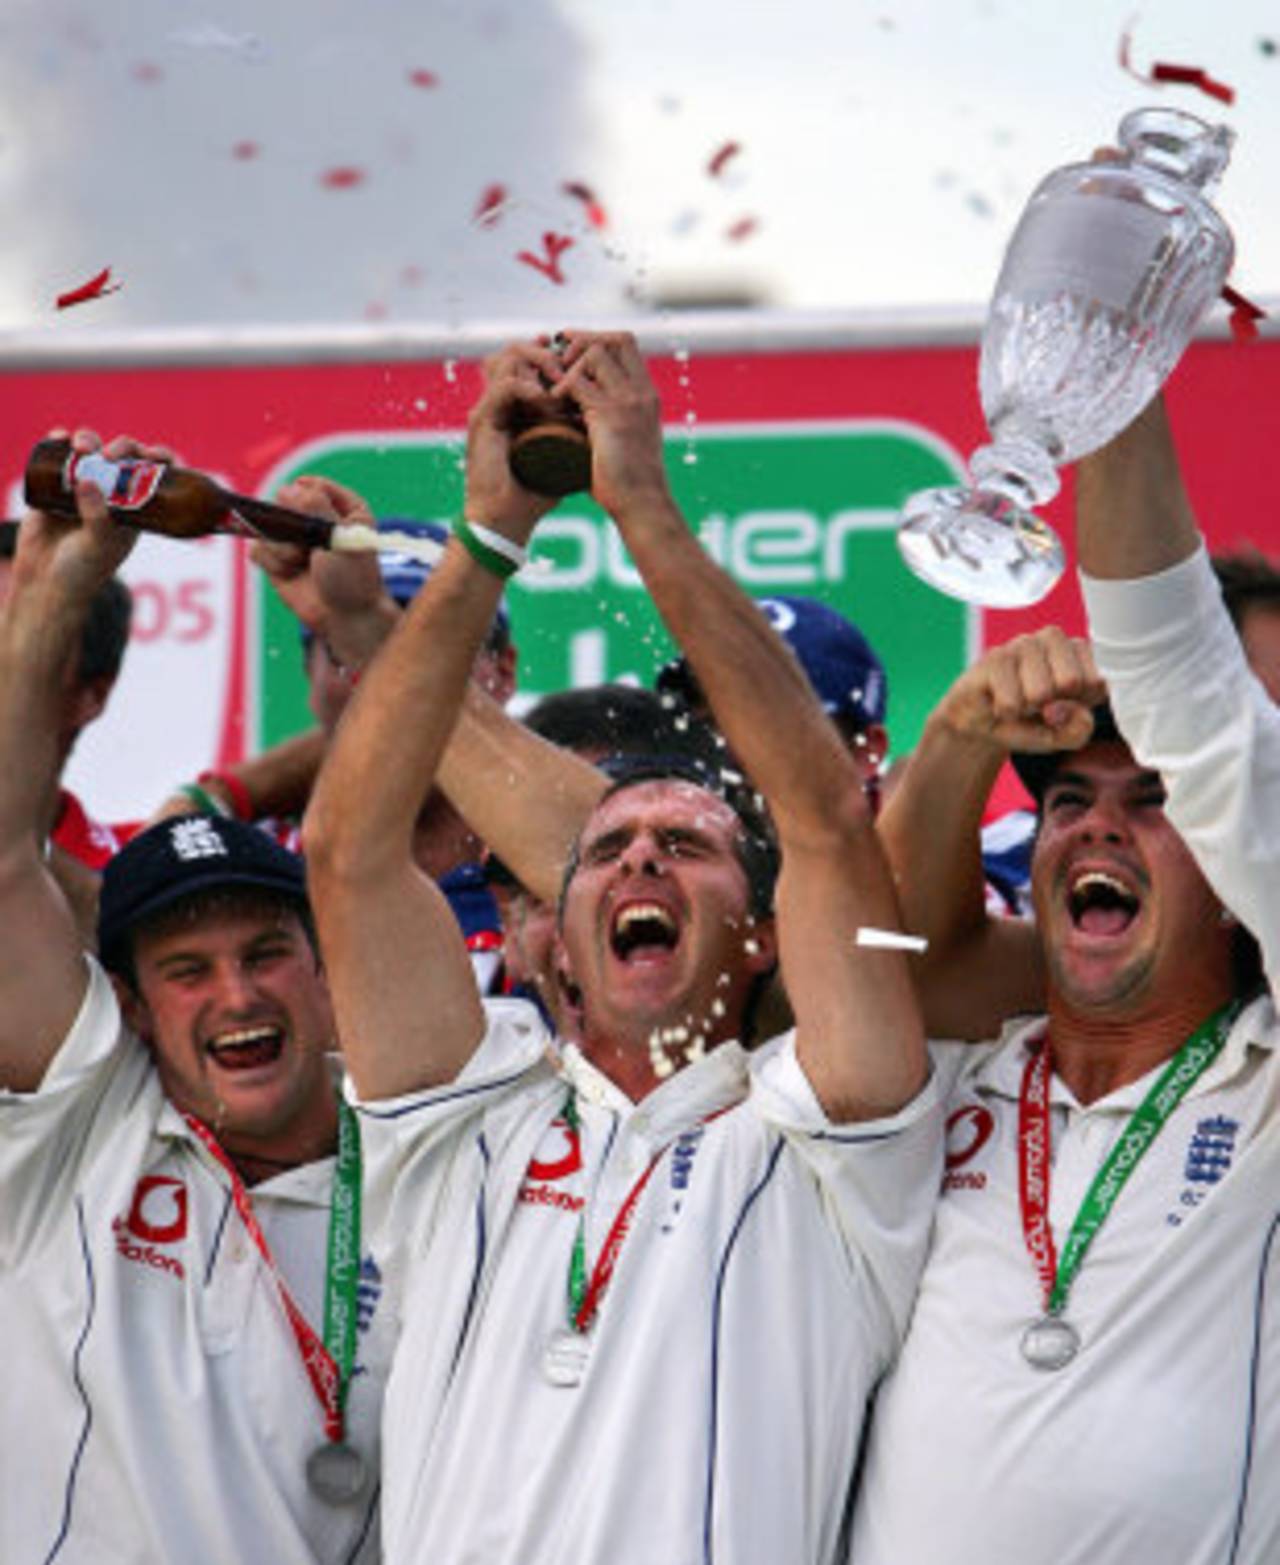 An ecstatic Michael Vaughan lifts the Ashes, England v Australia, The Oval, September 12, 2005